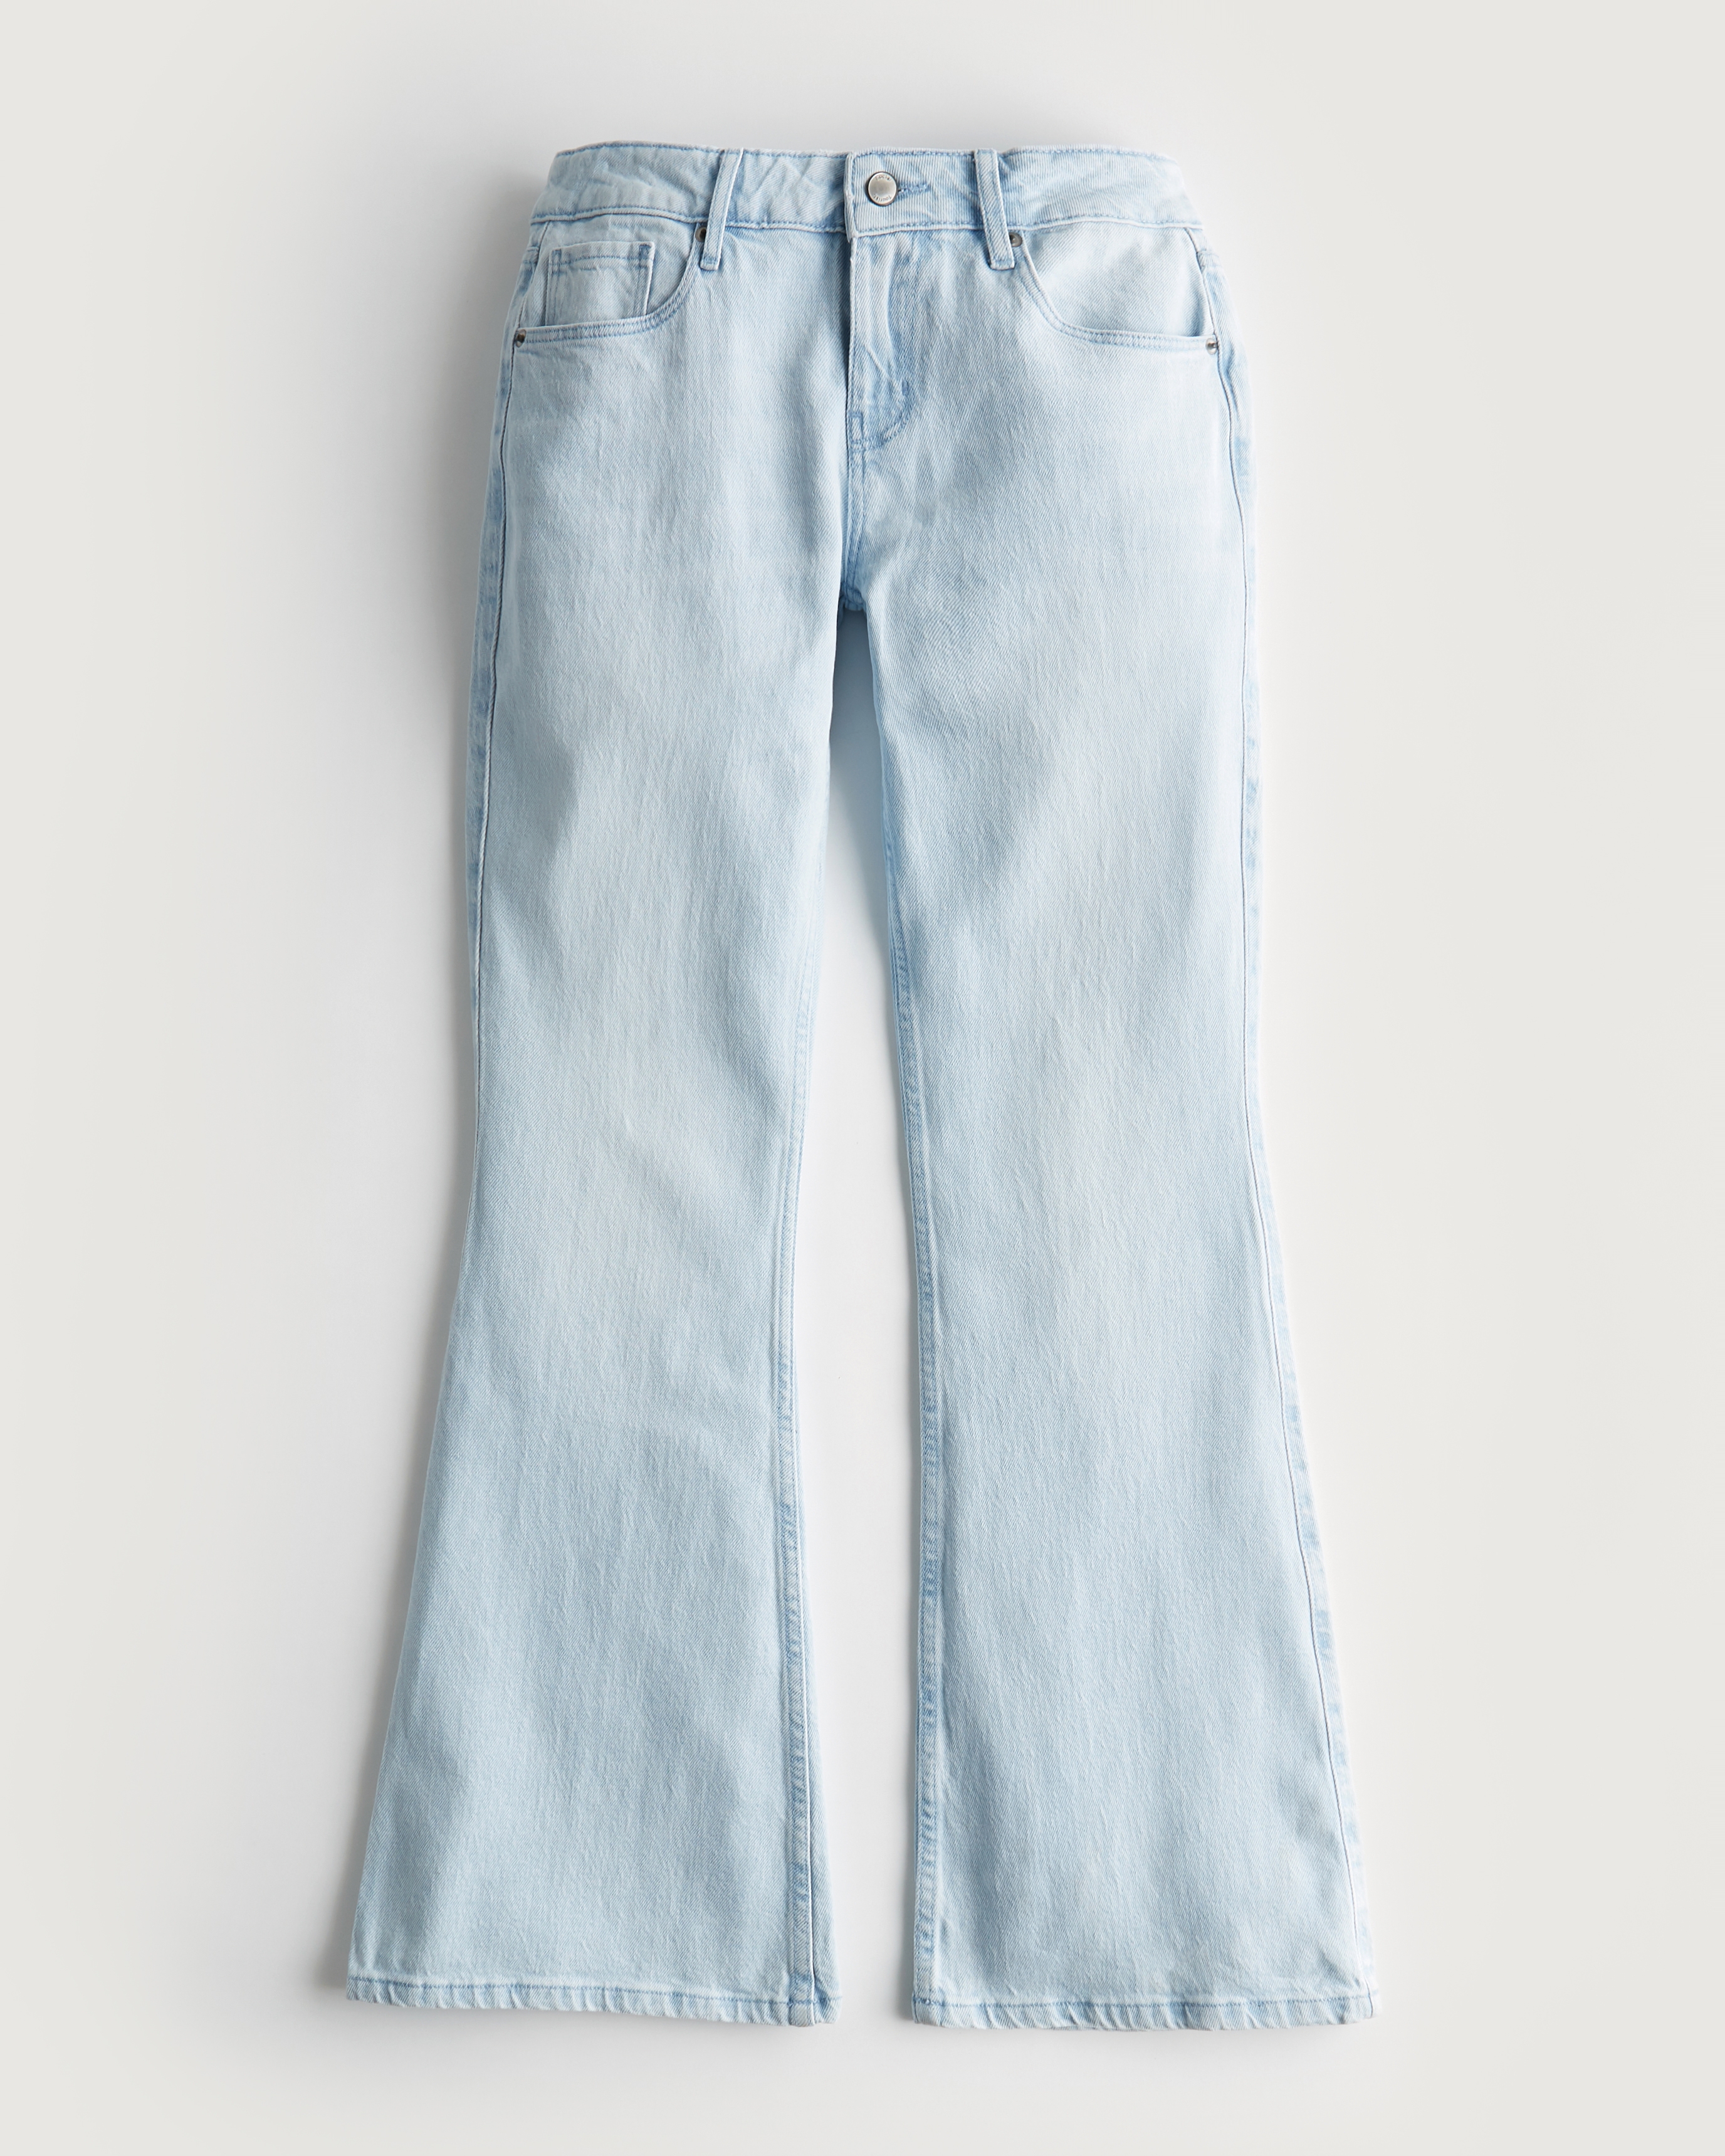 Hollister Low Rise Flare Jeans for Sale in Palmdale, CA - OfferUp